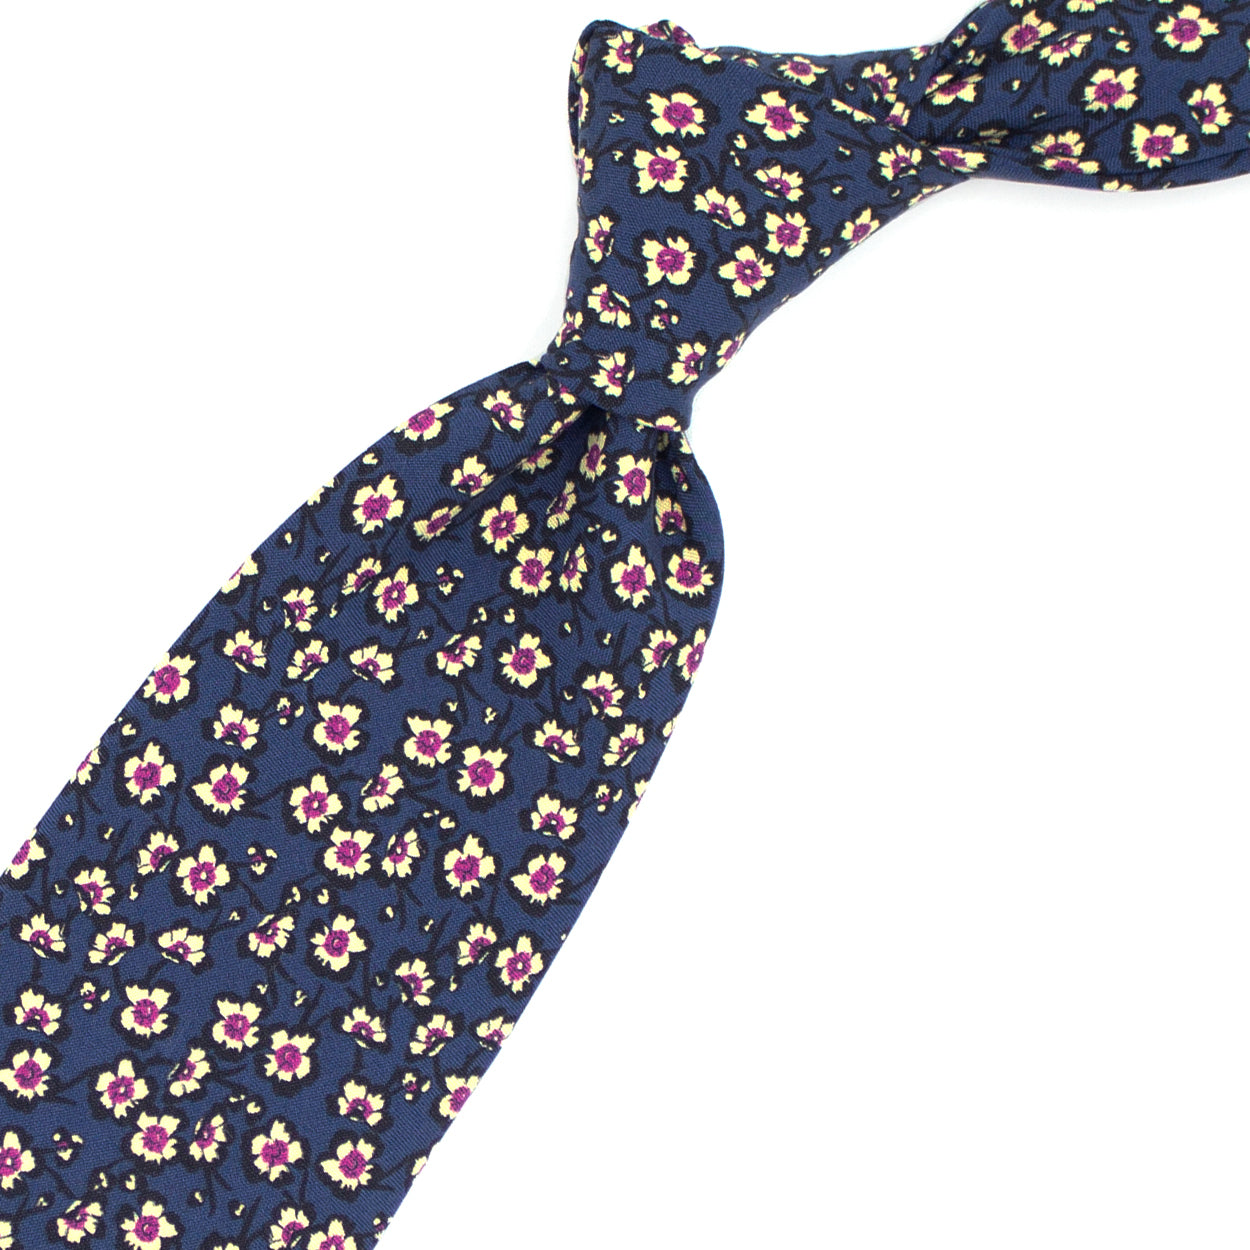 Blue tie with flowers